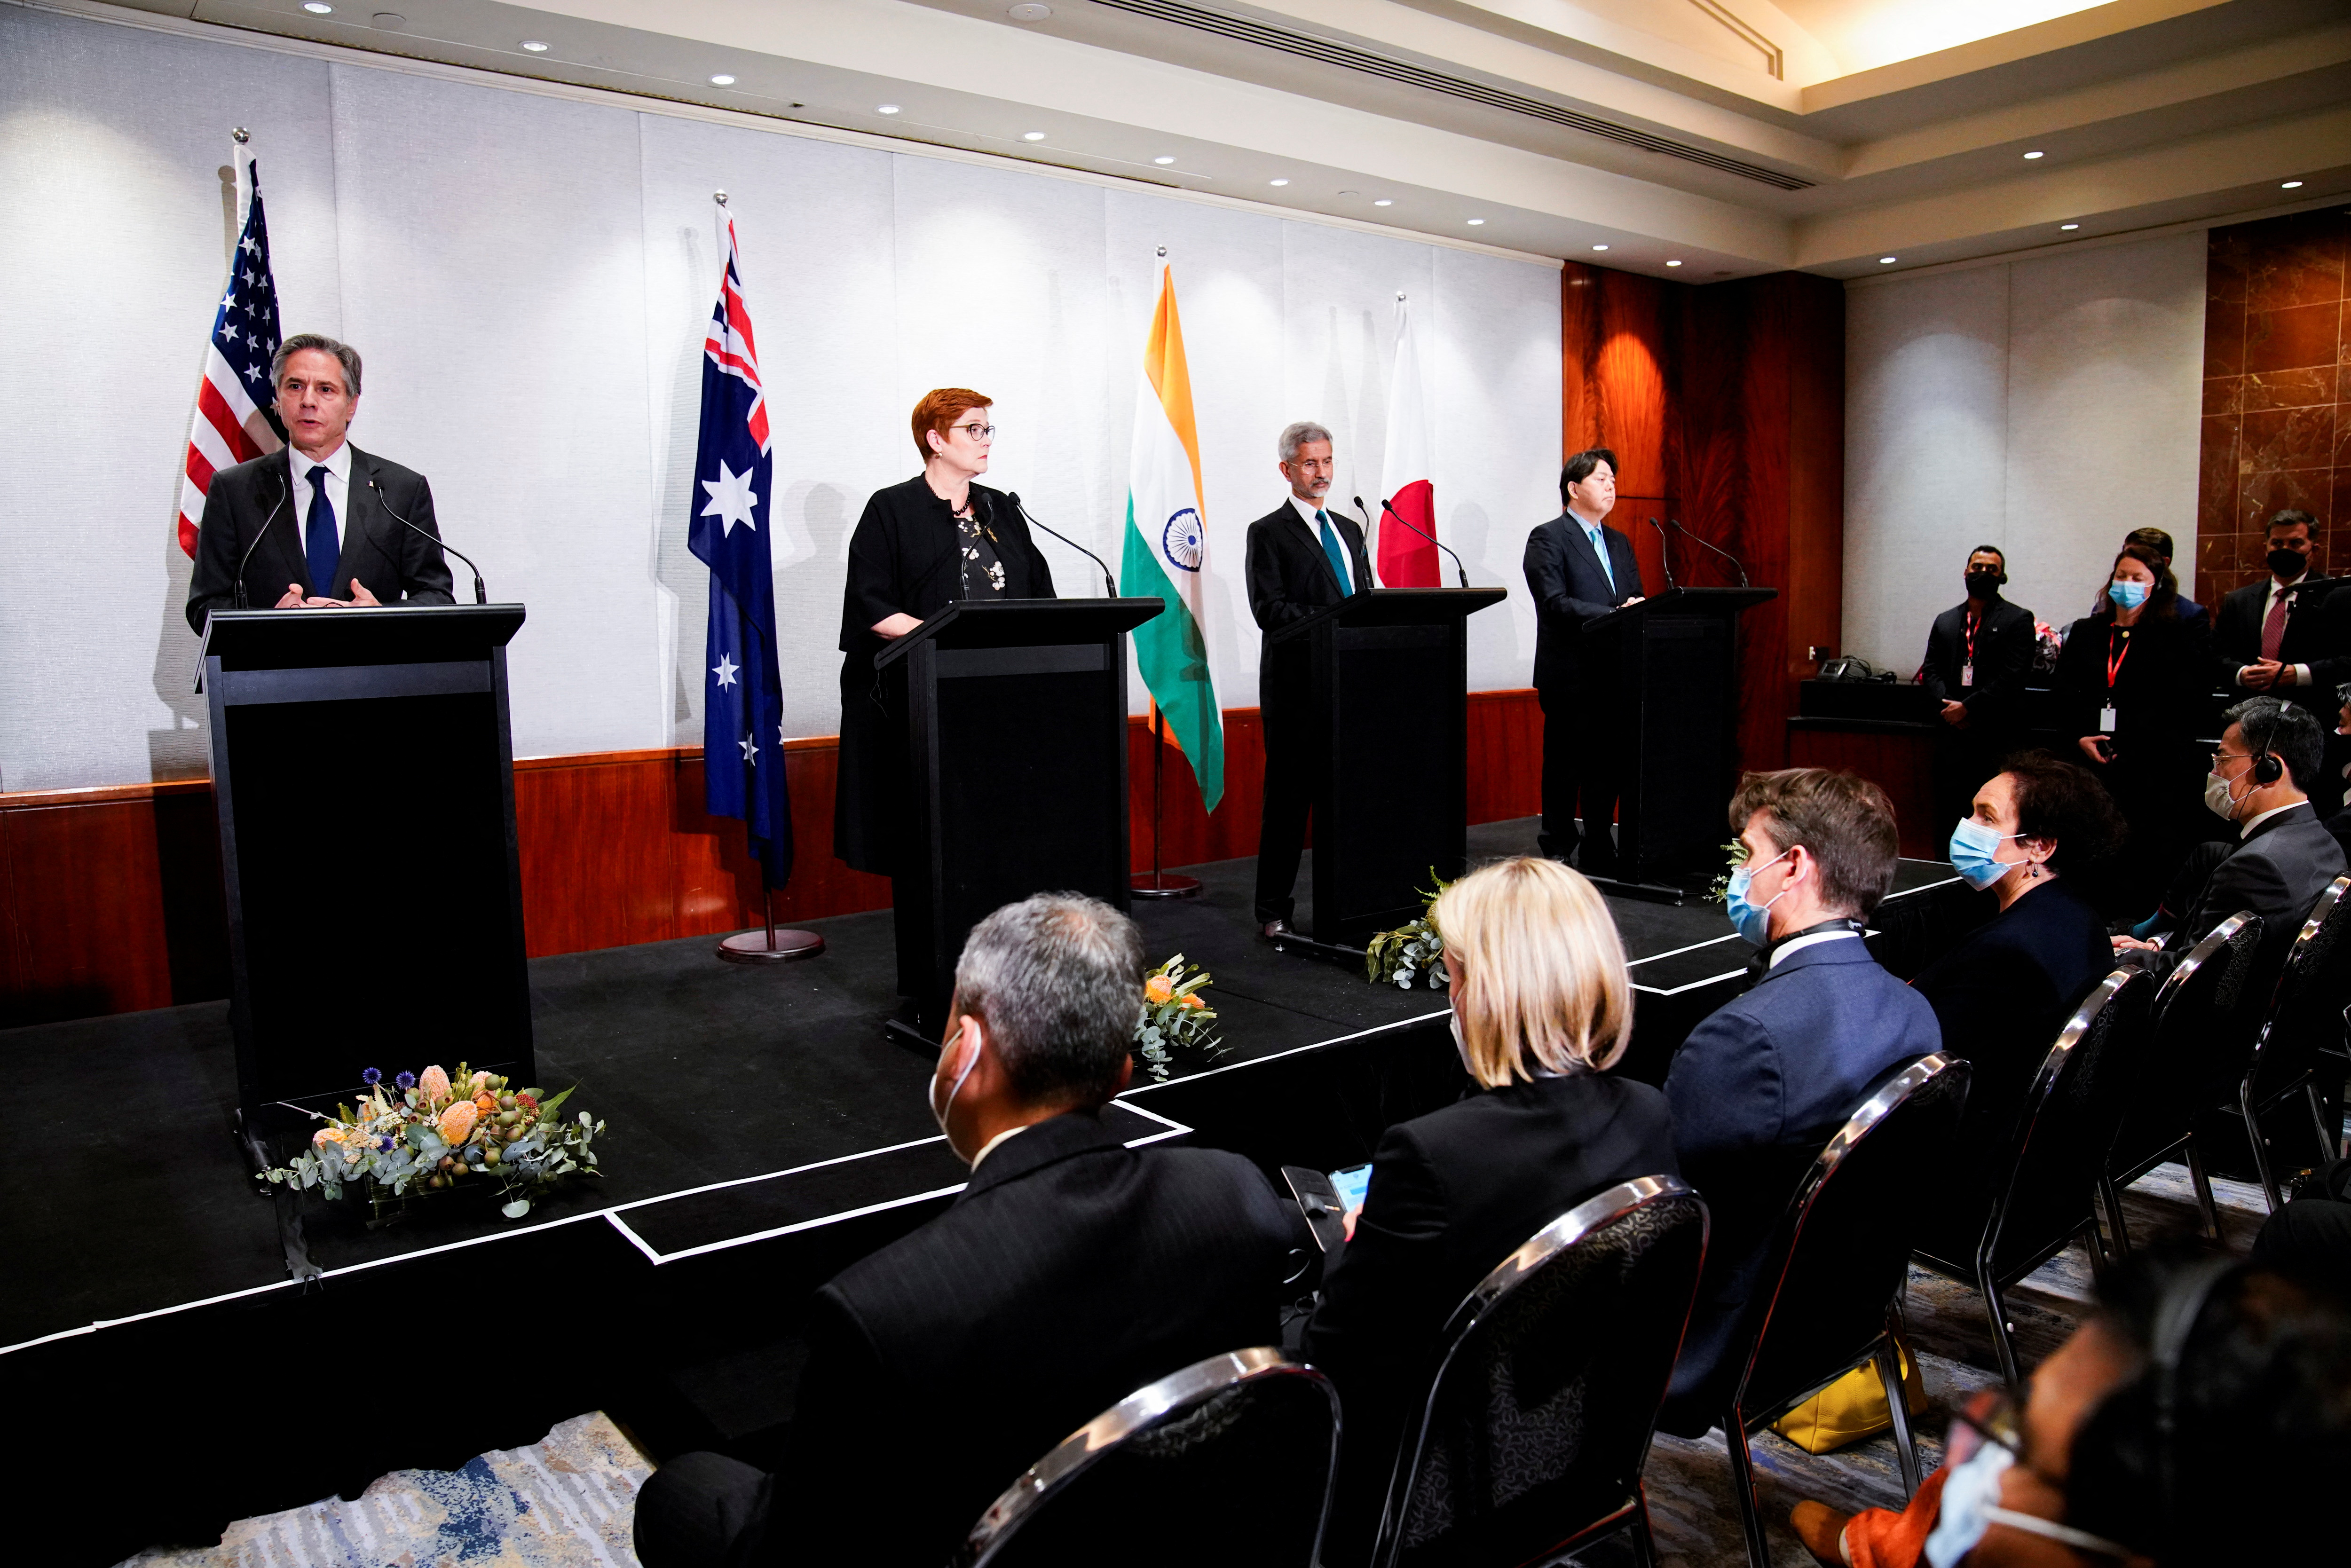 A meeting of the Quadrilateral Security Dialogue (Quad) foreign ministers in Melbourne